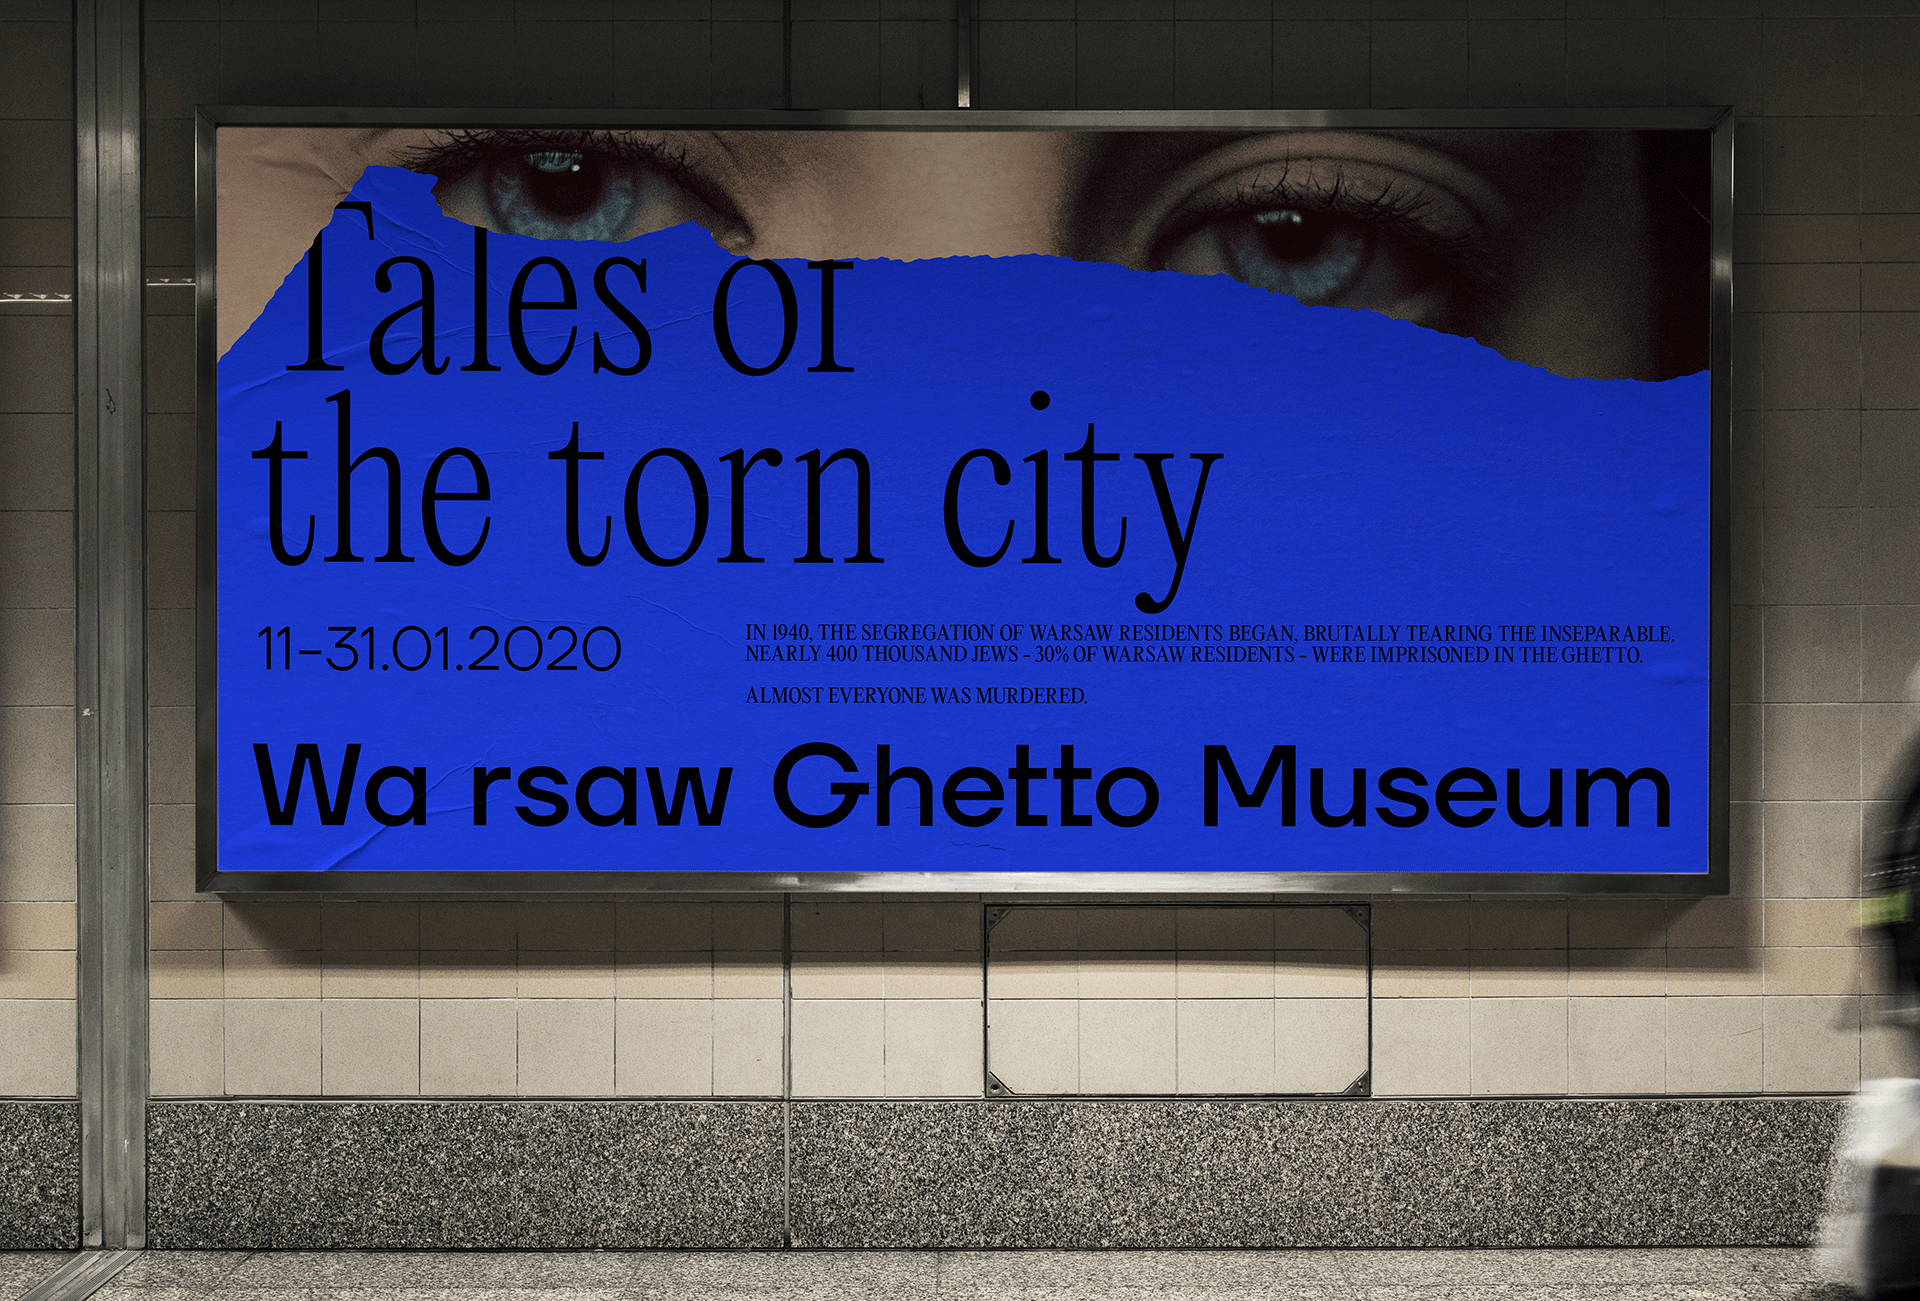 A Visual Tale of the Torn City